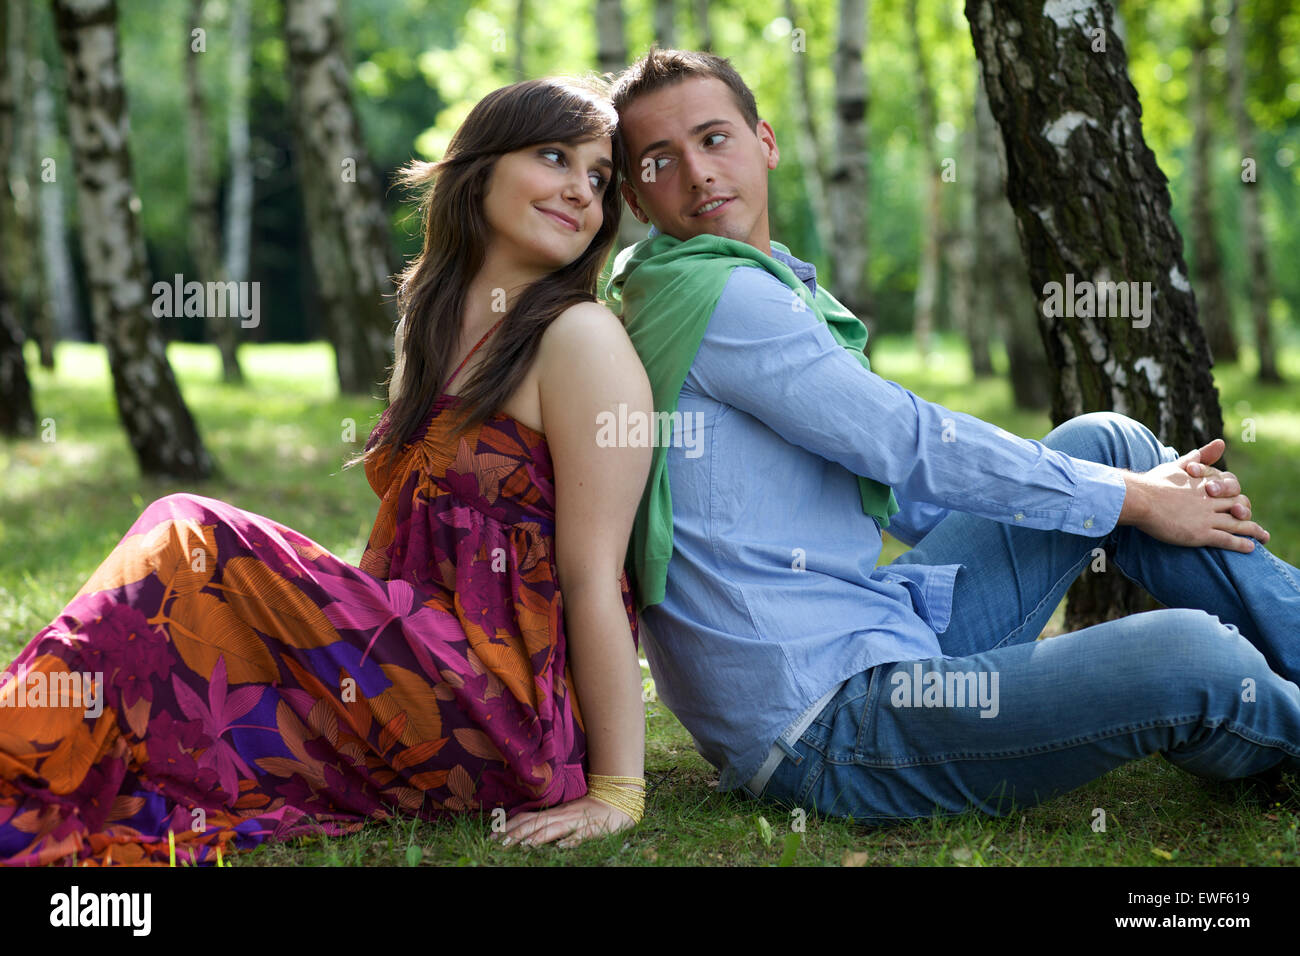 Young couple sitting back to back in park Stock Photo